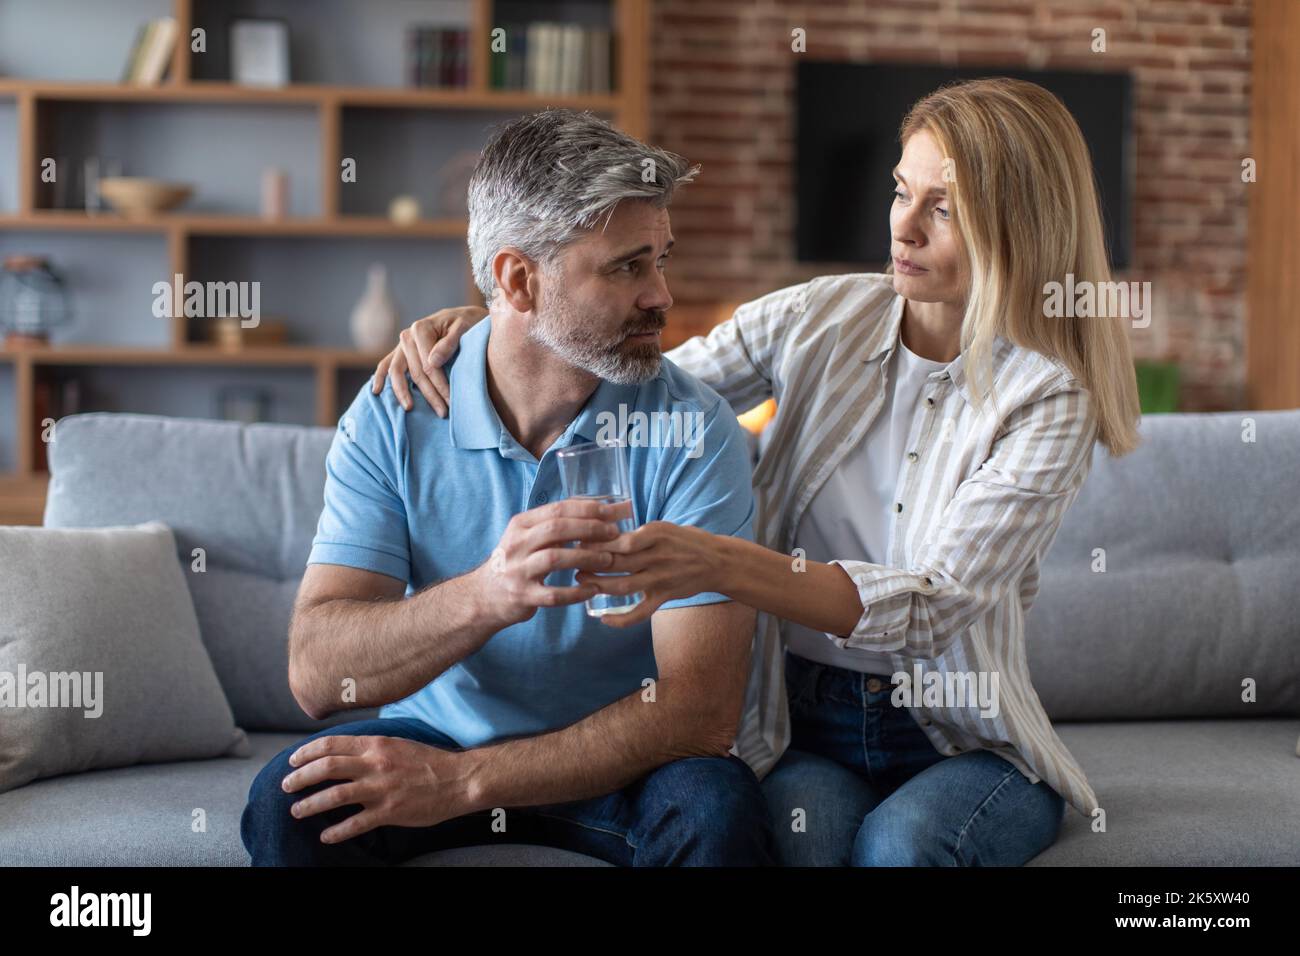 Sad middle aged european wife gives water and calms depressed unhappy man in living room interior Stock Photo